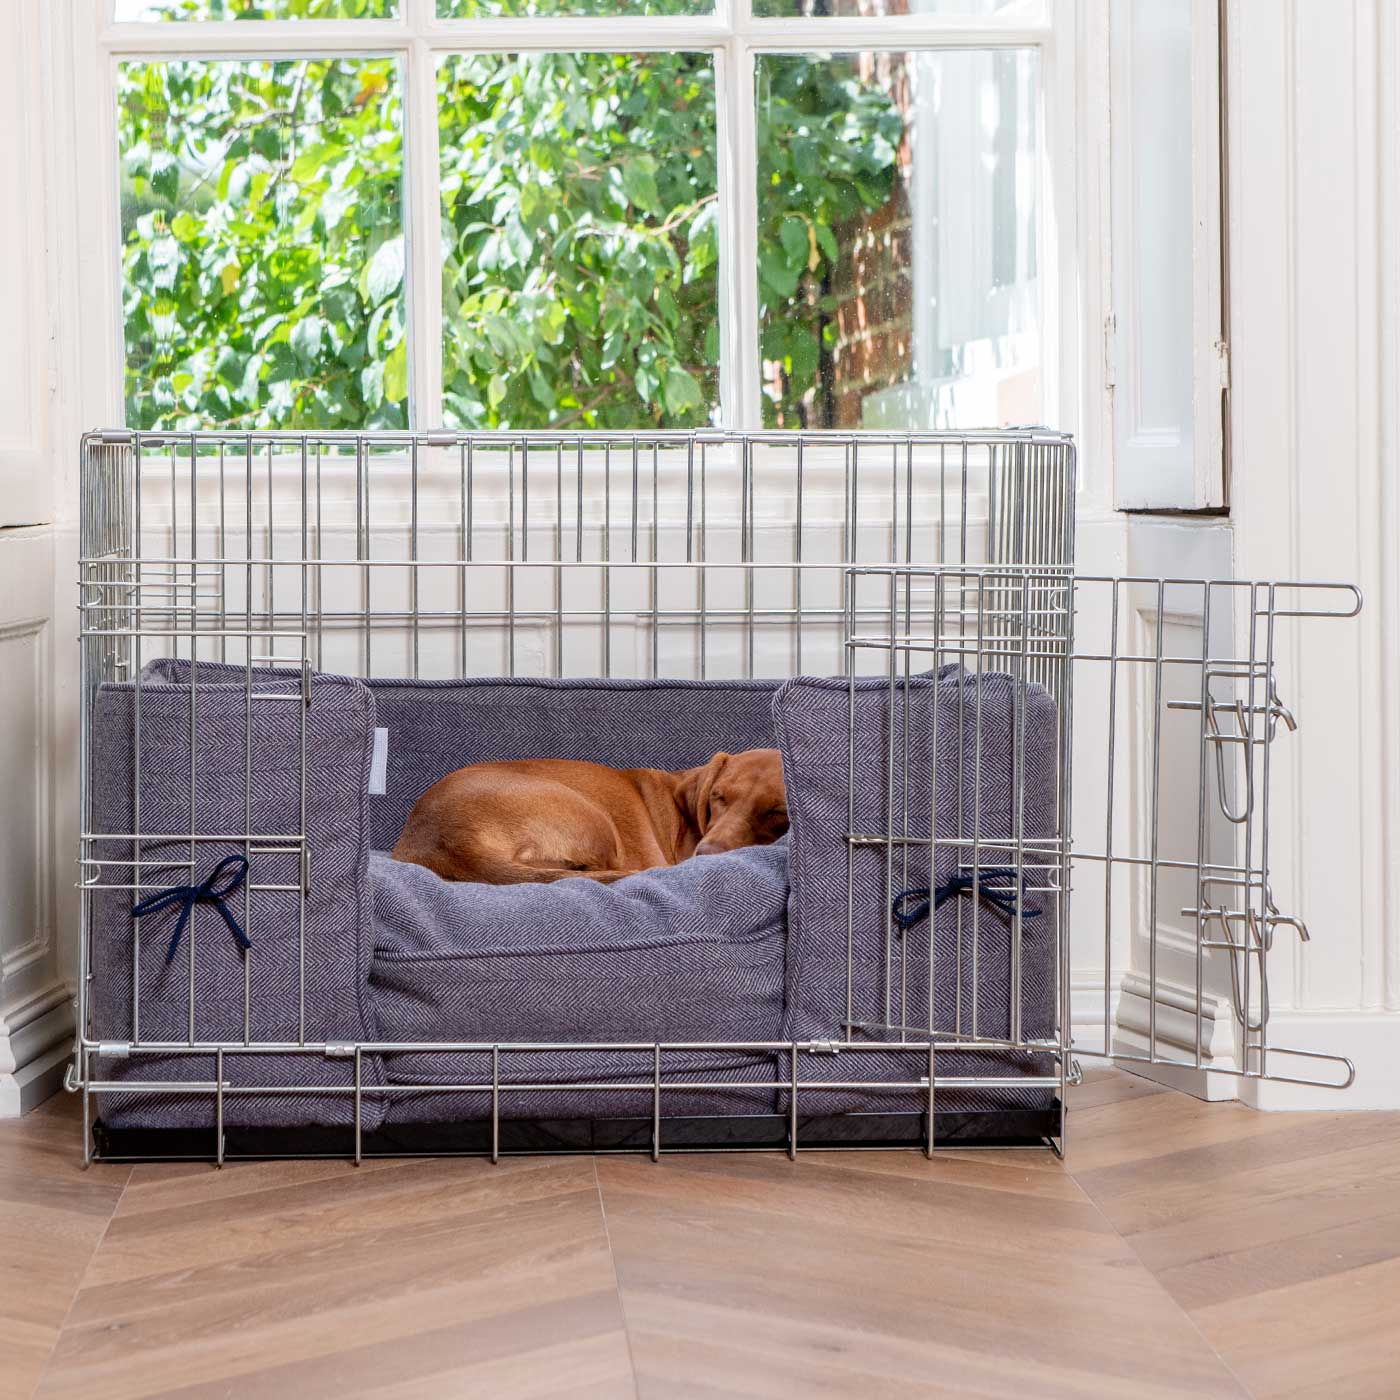 Discover our Luxury Dog Crate Bumper, in Oxford Herringbone. The Perfect Dog Crate Accessory, Available To Personalise Now at Lords & Labradors